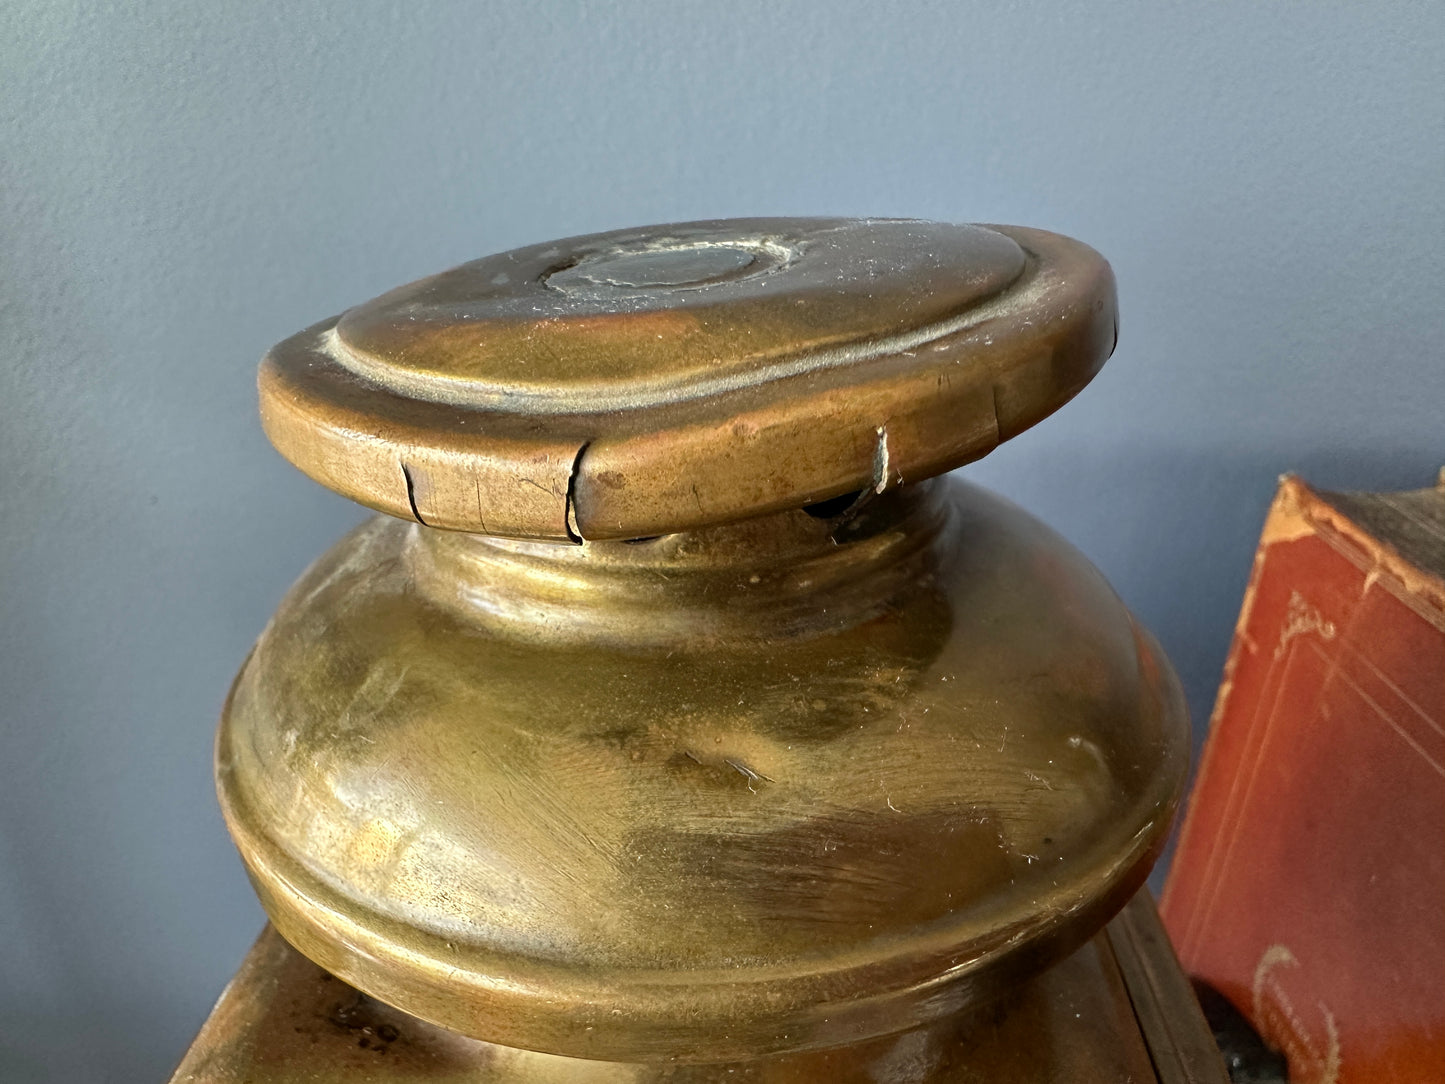 Brass Side Car / Carriage Lamp